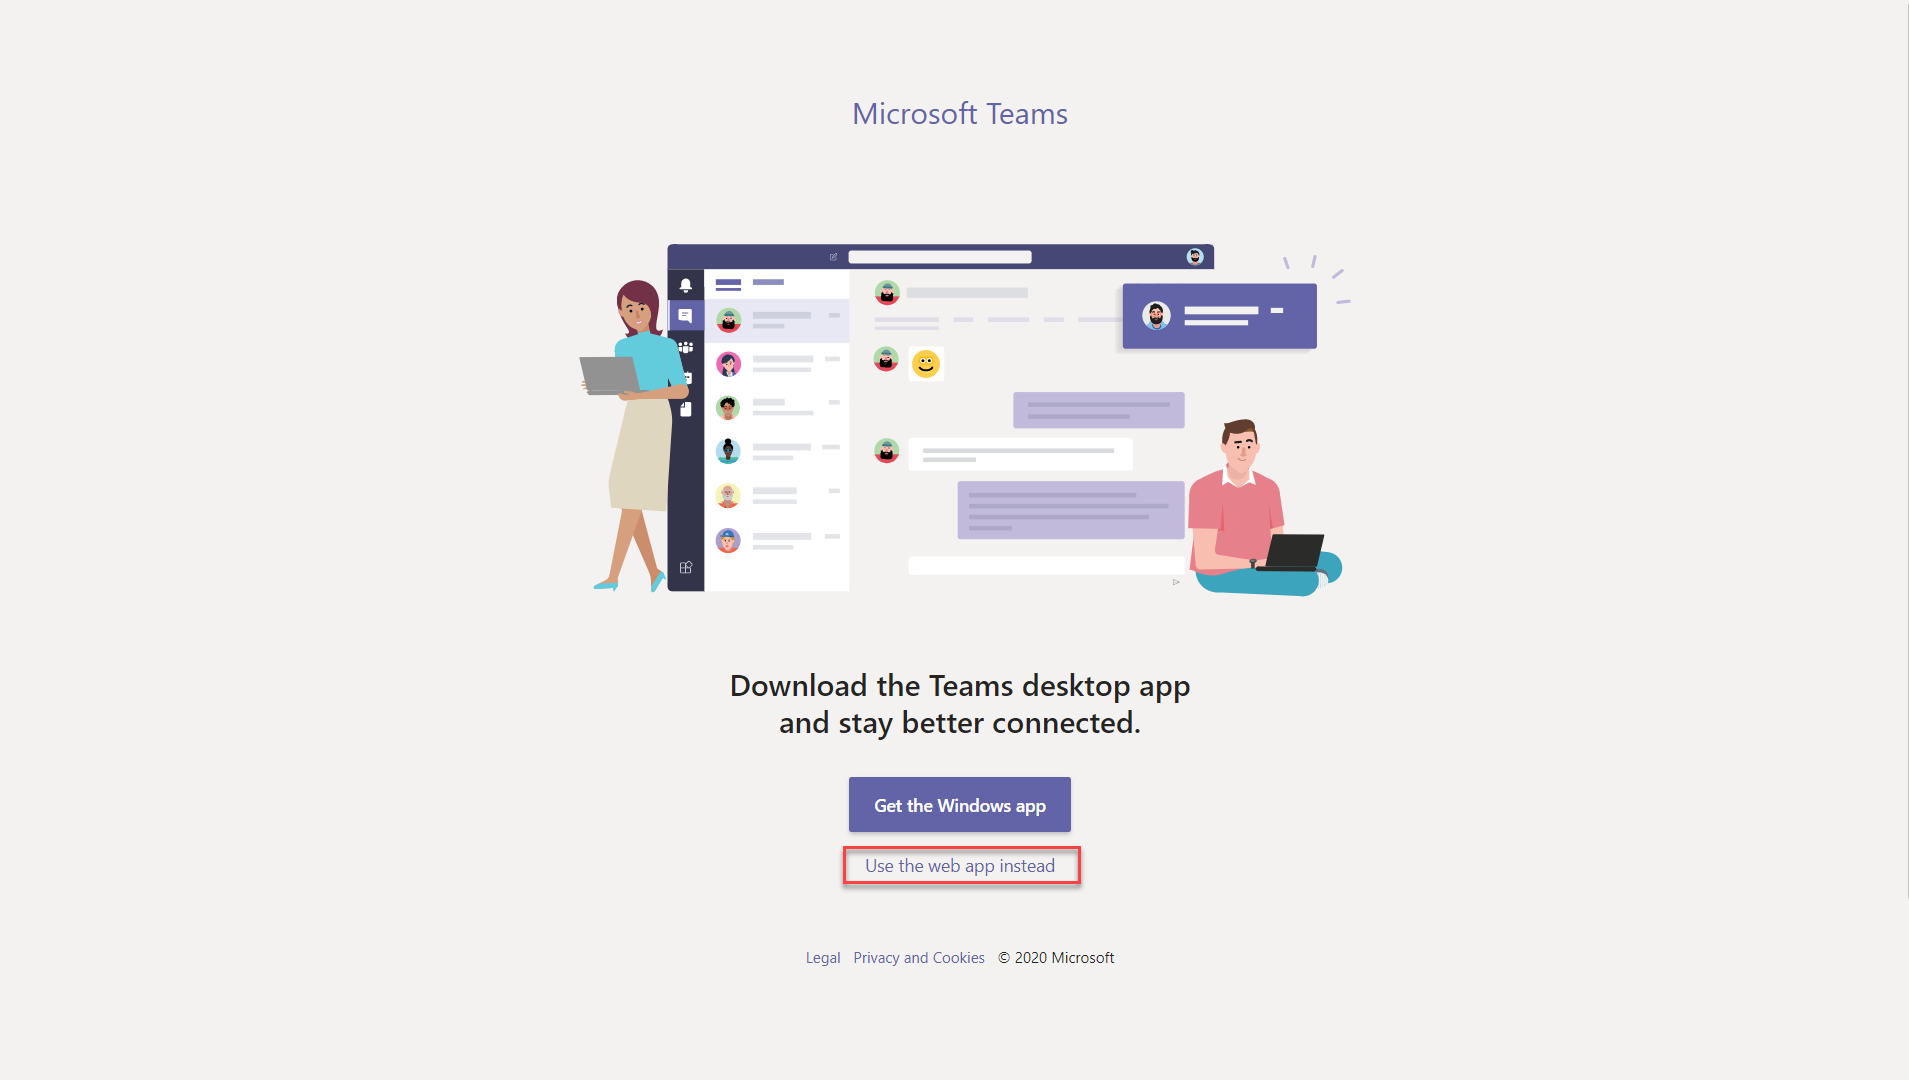 A screenshot of the Microsoft Teams web browser landing page with a border around the use the web app instead button